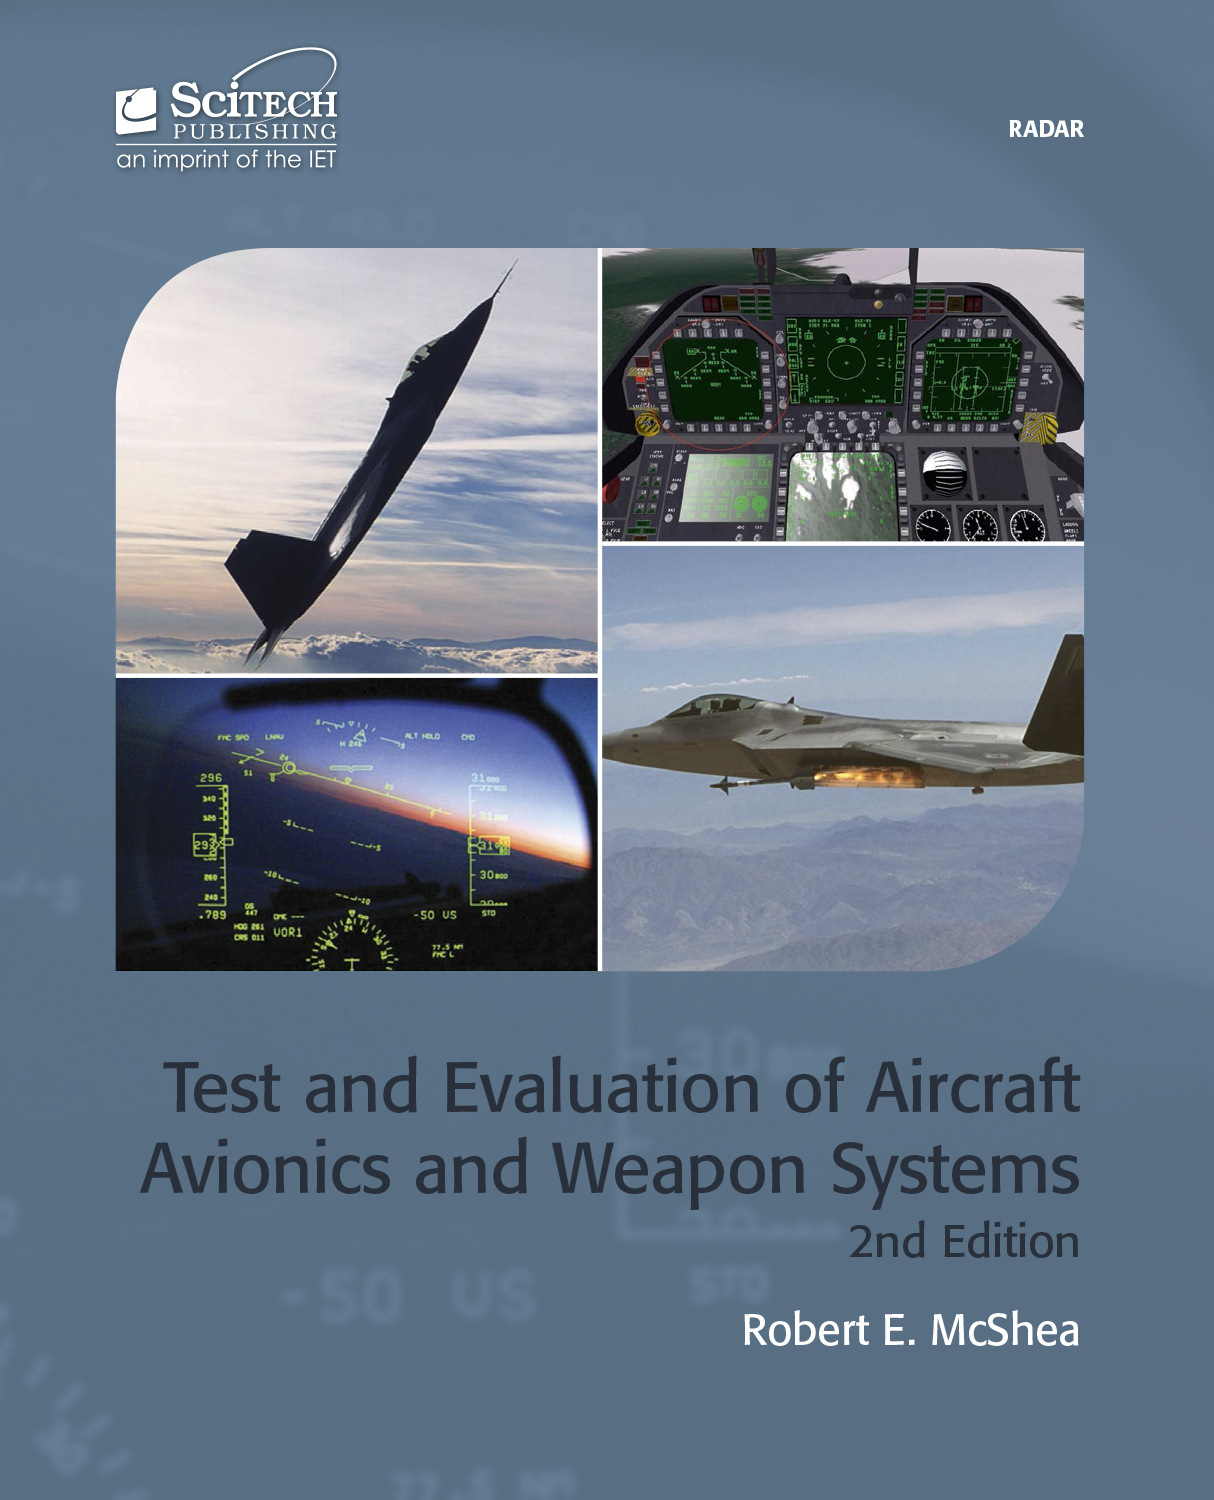 Test and Evaluation of Aircraft Avionics and Weapon Systems, 2nd Edition